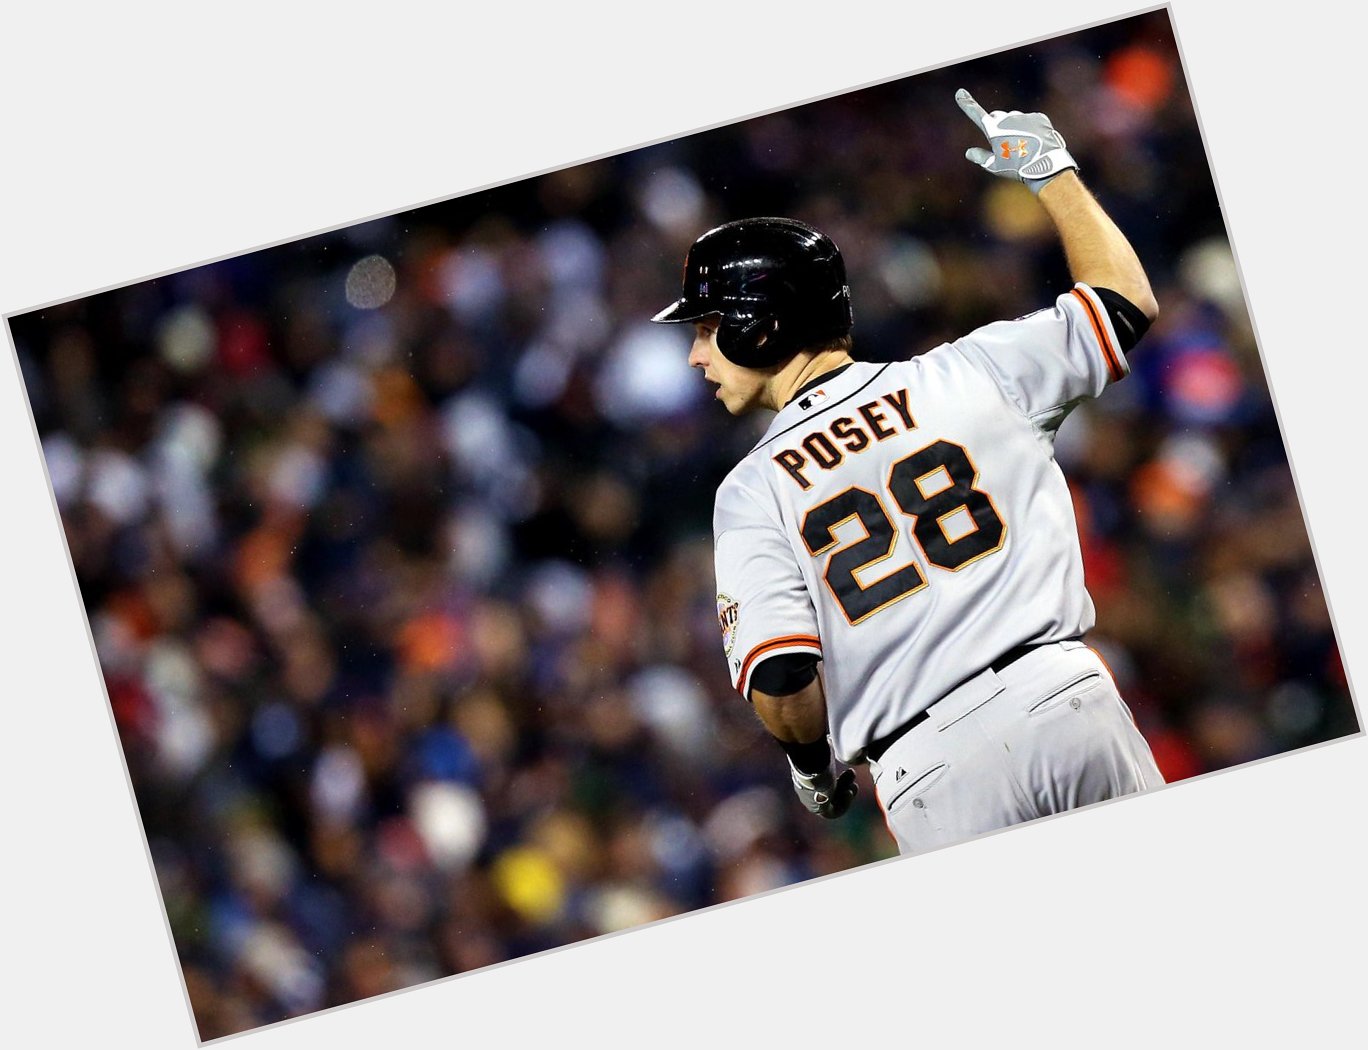   to wish Buster Posey a Happy 28th Birthday! I feel so unaccomplished as a 28 YO now.